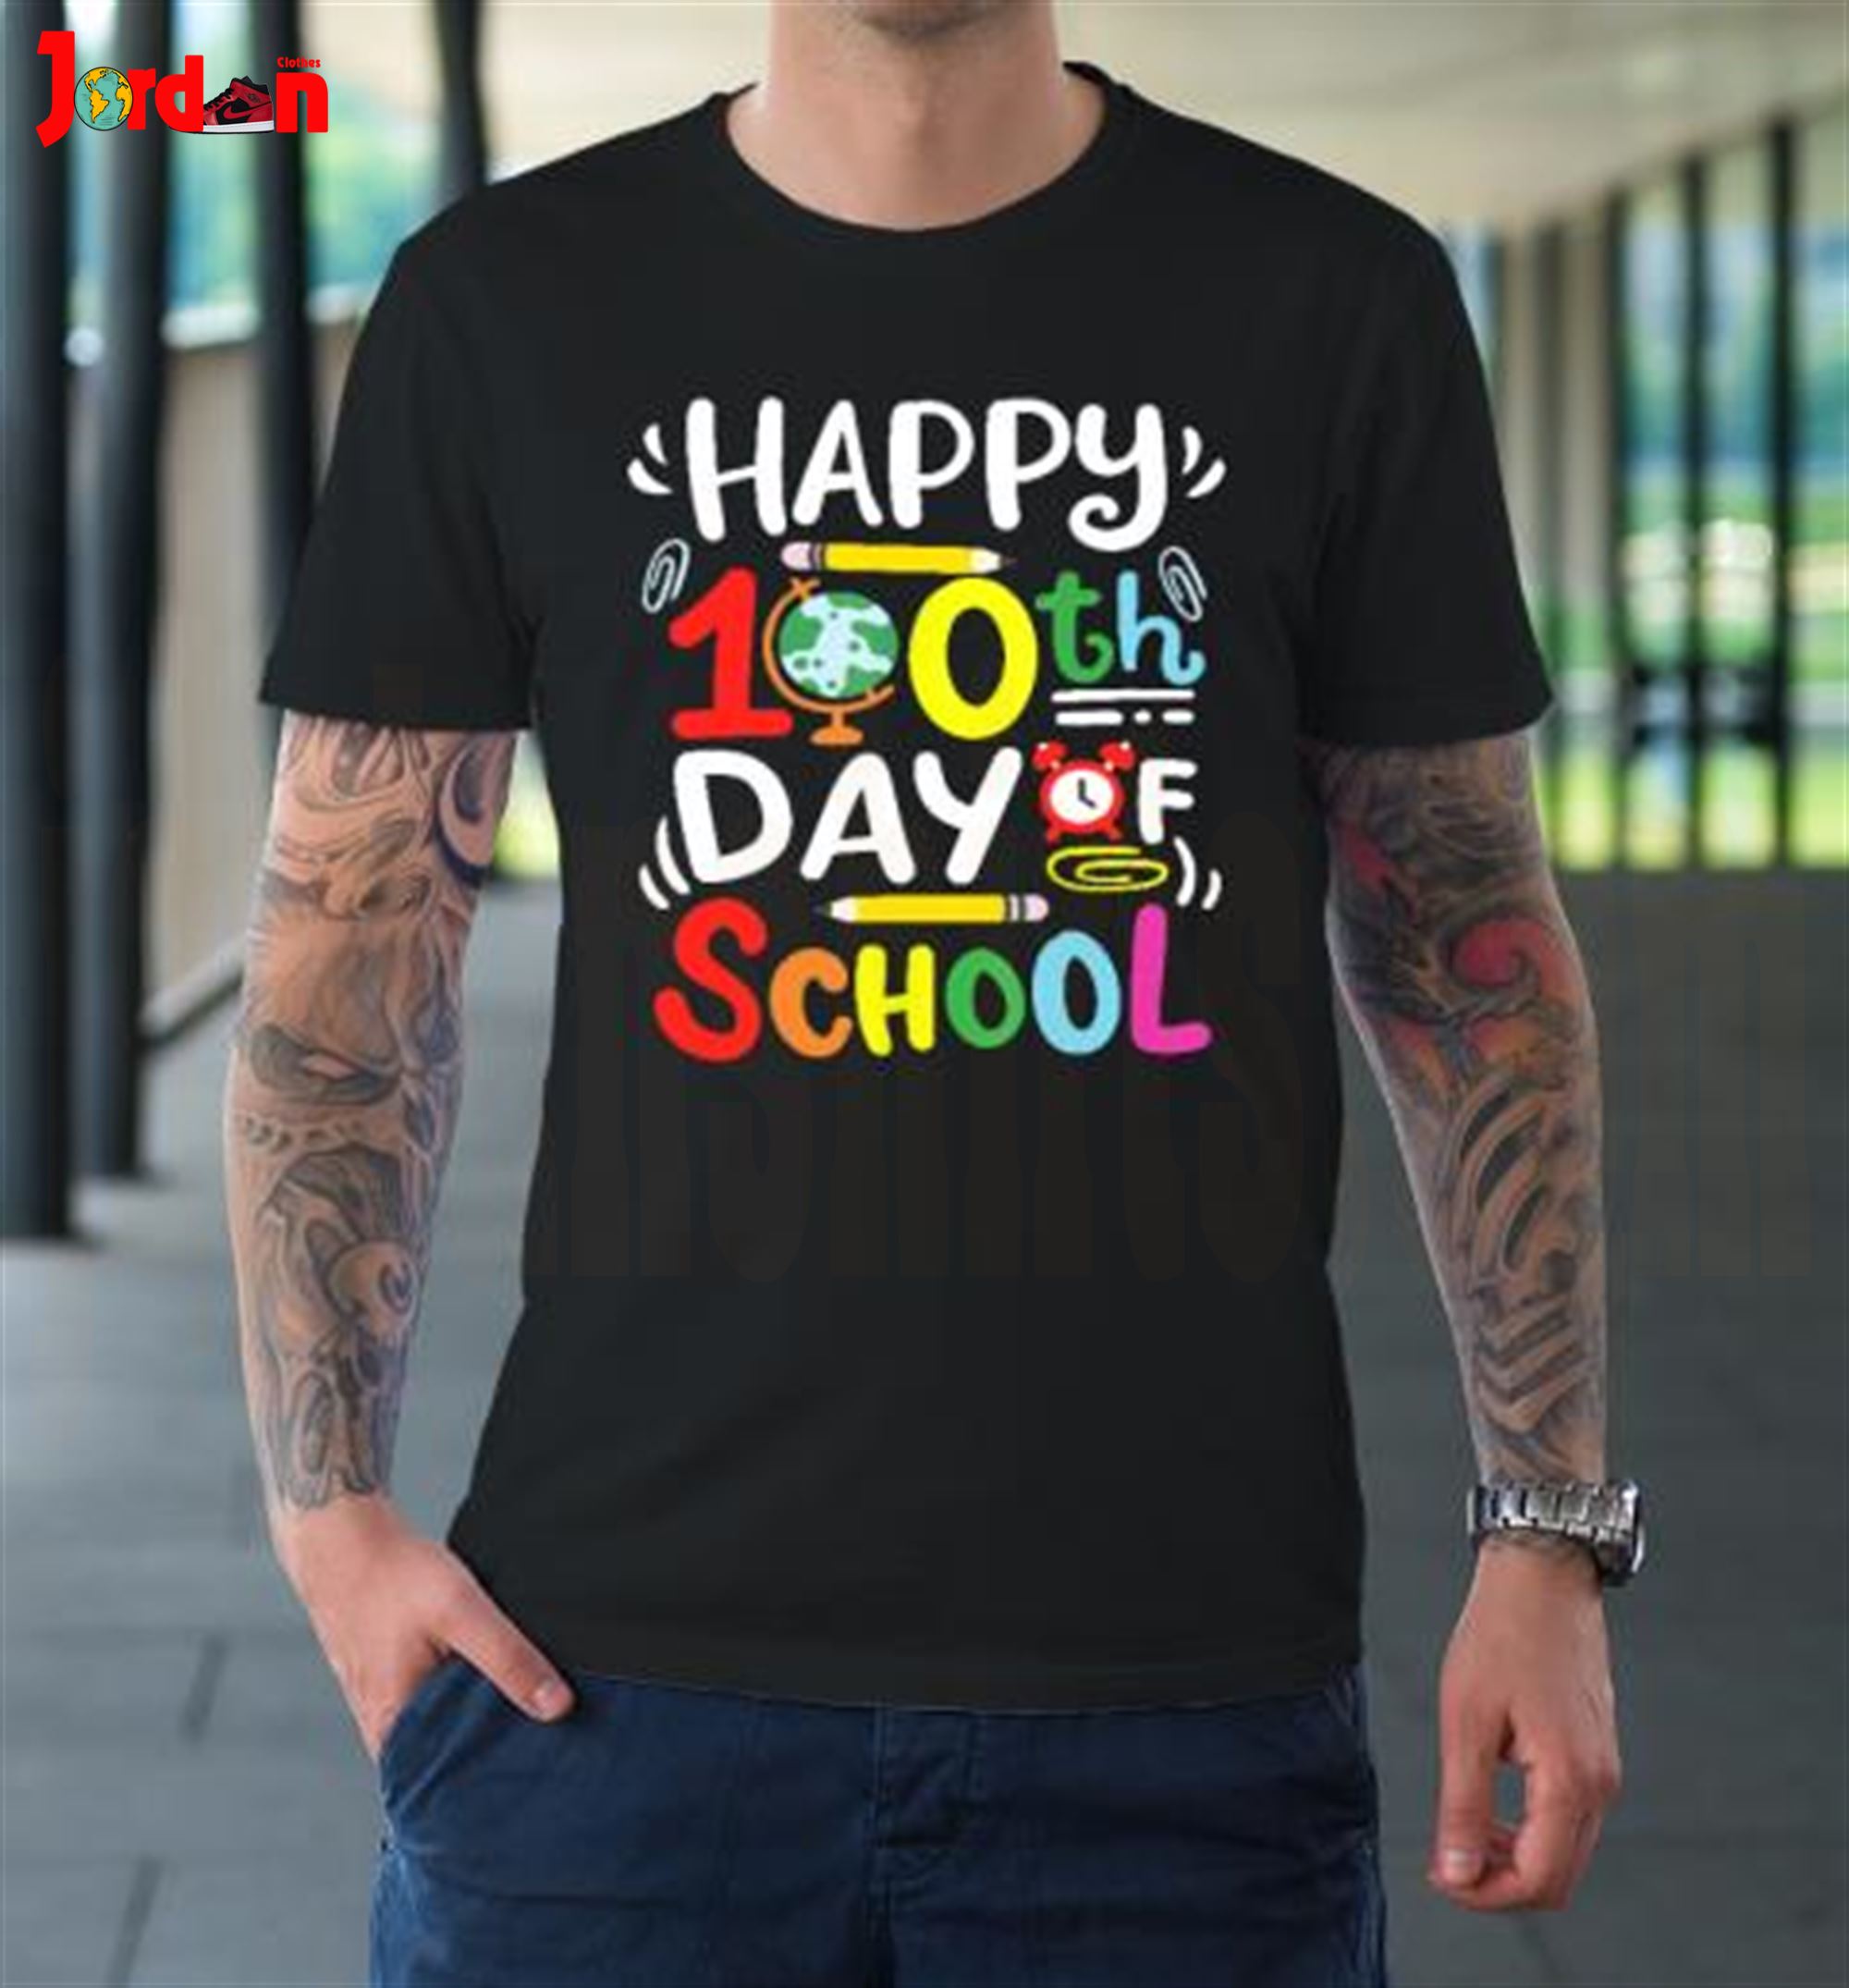 Happy 100th Day Of School 100 Days Of School Teacher Student T-shirt Full Size Up To 5xl | Trending Shirts